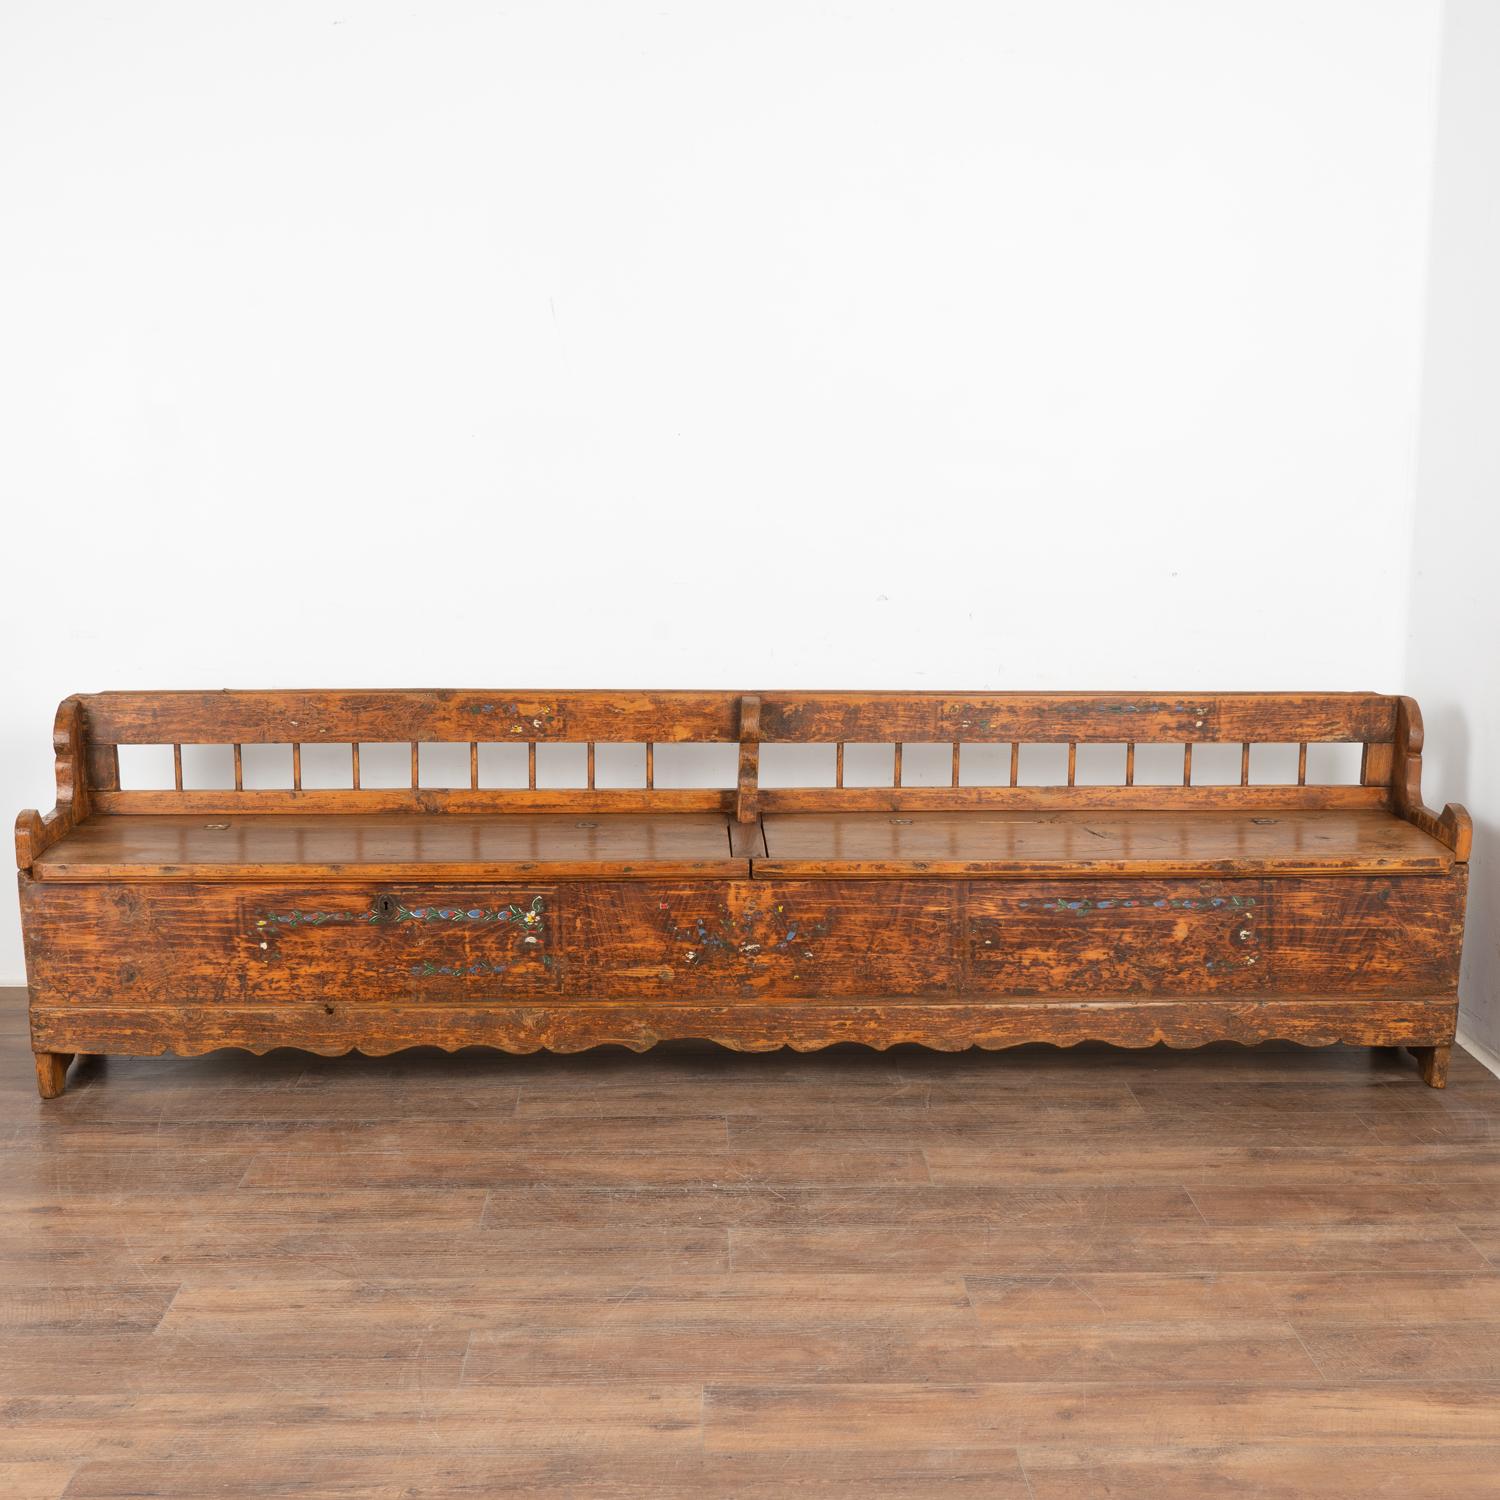 Hungarian Long Hand Painted Bench With Interior Storage, Hungary circa 1880 For Sale